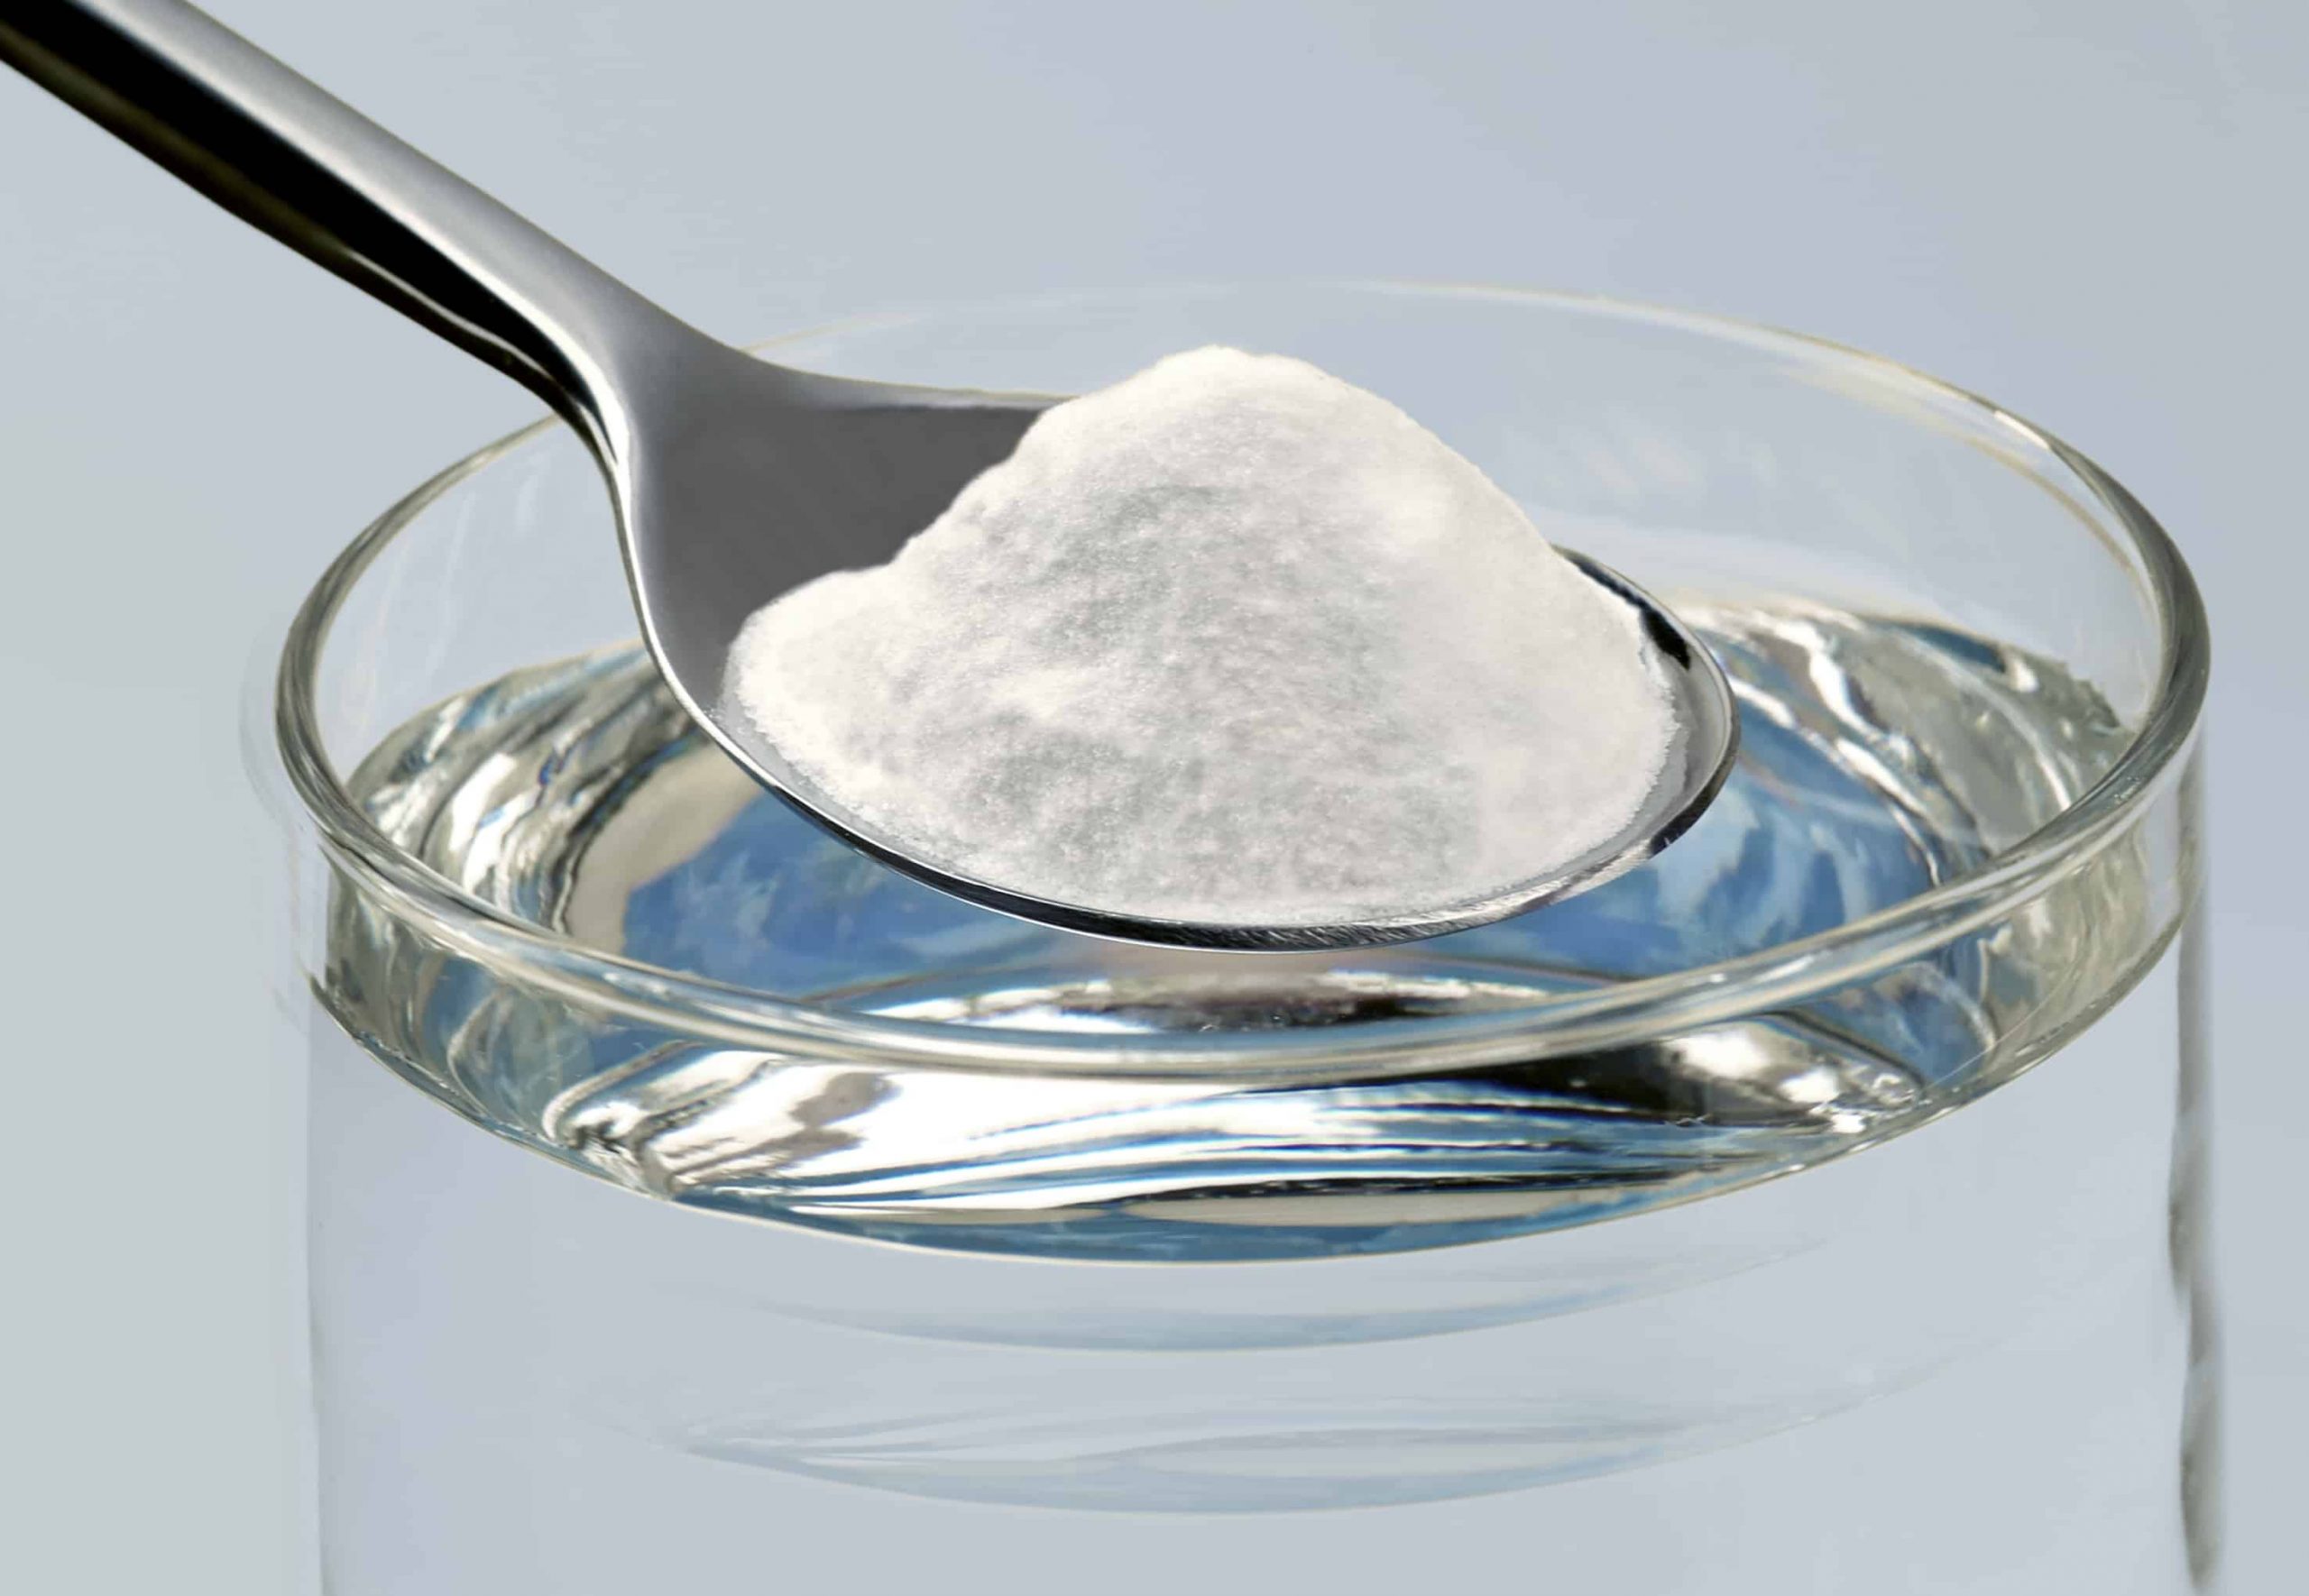 Baking soda to clean lash extension